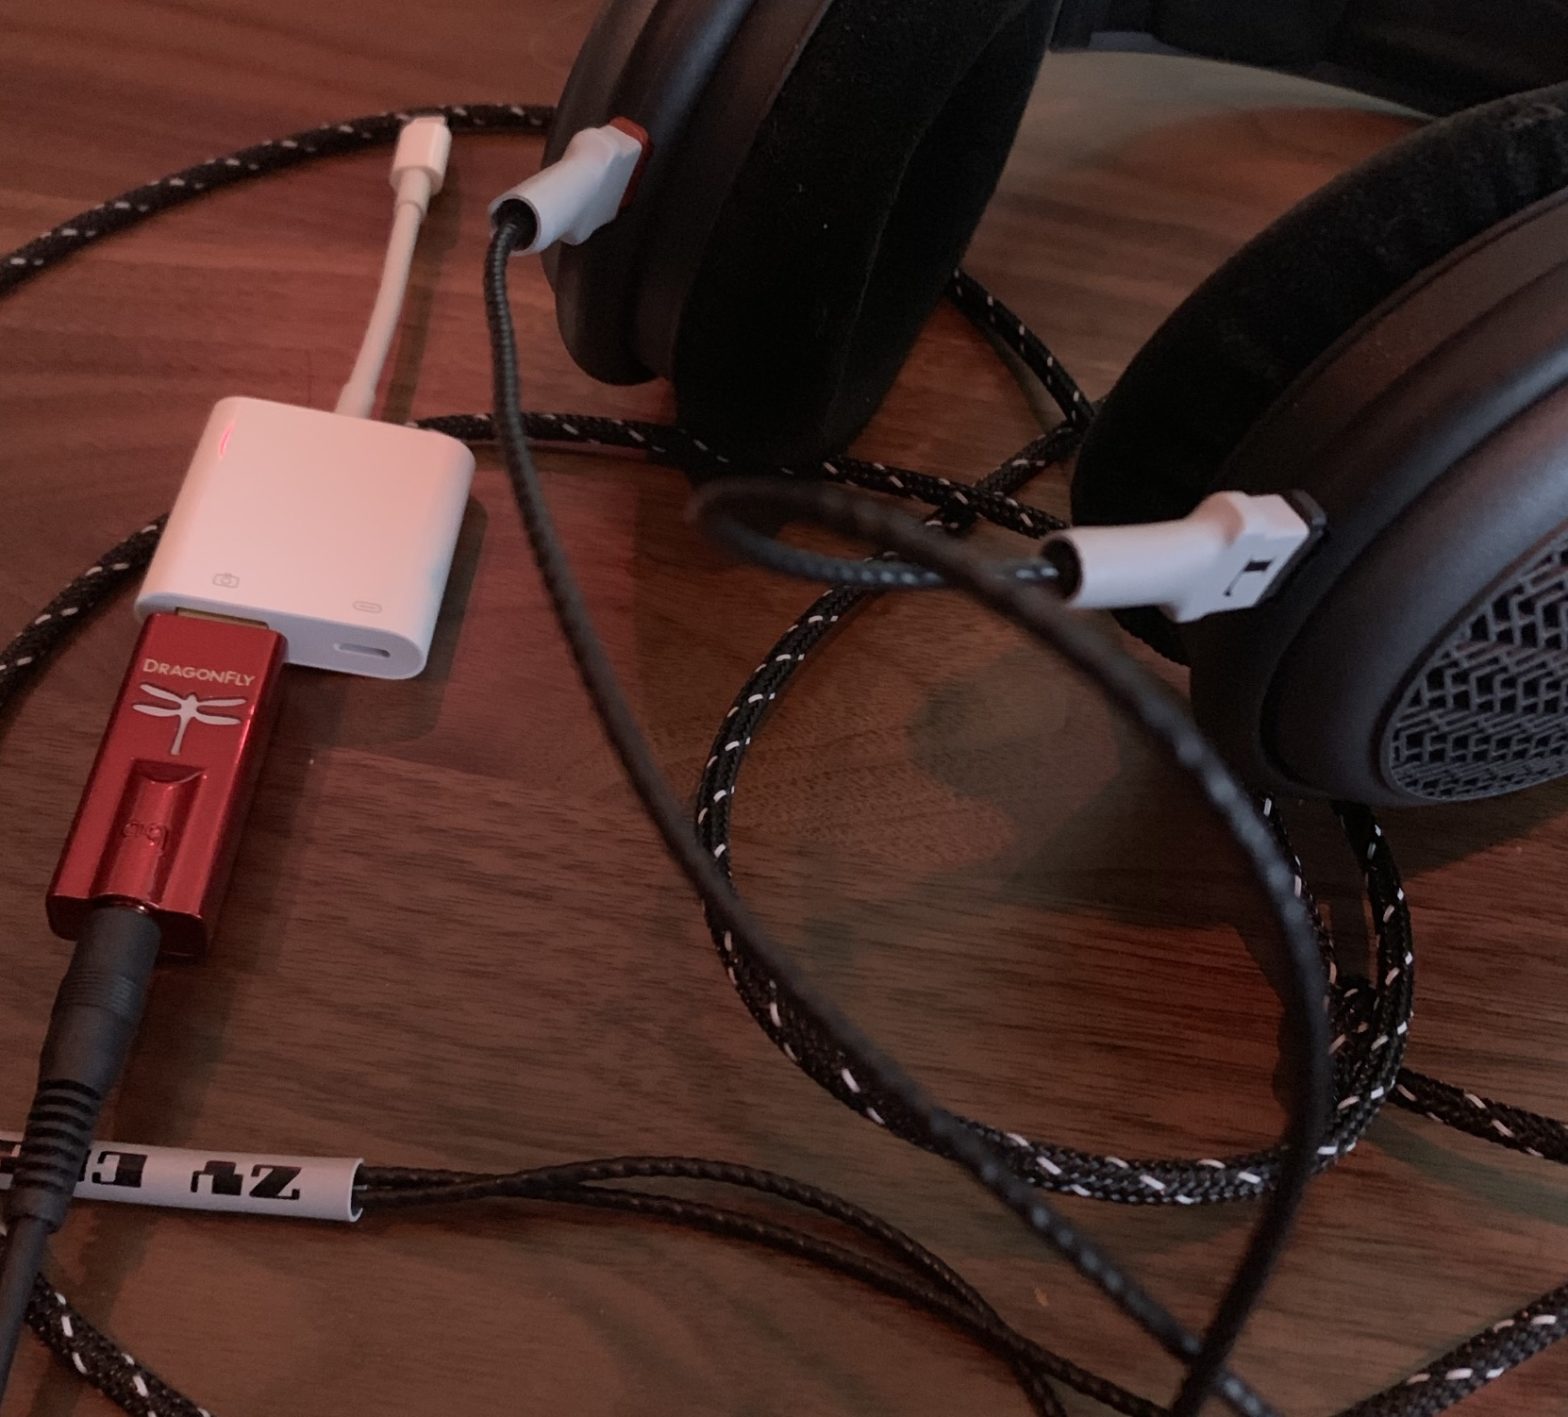 headphones and dongles